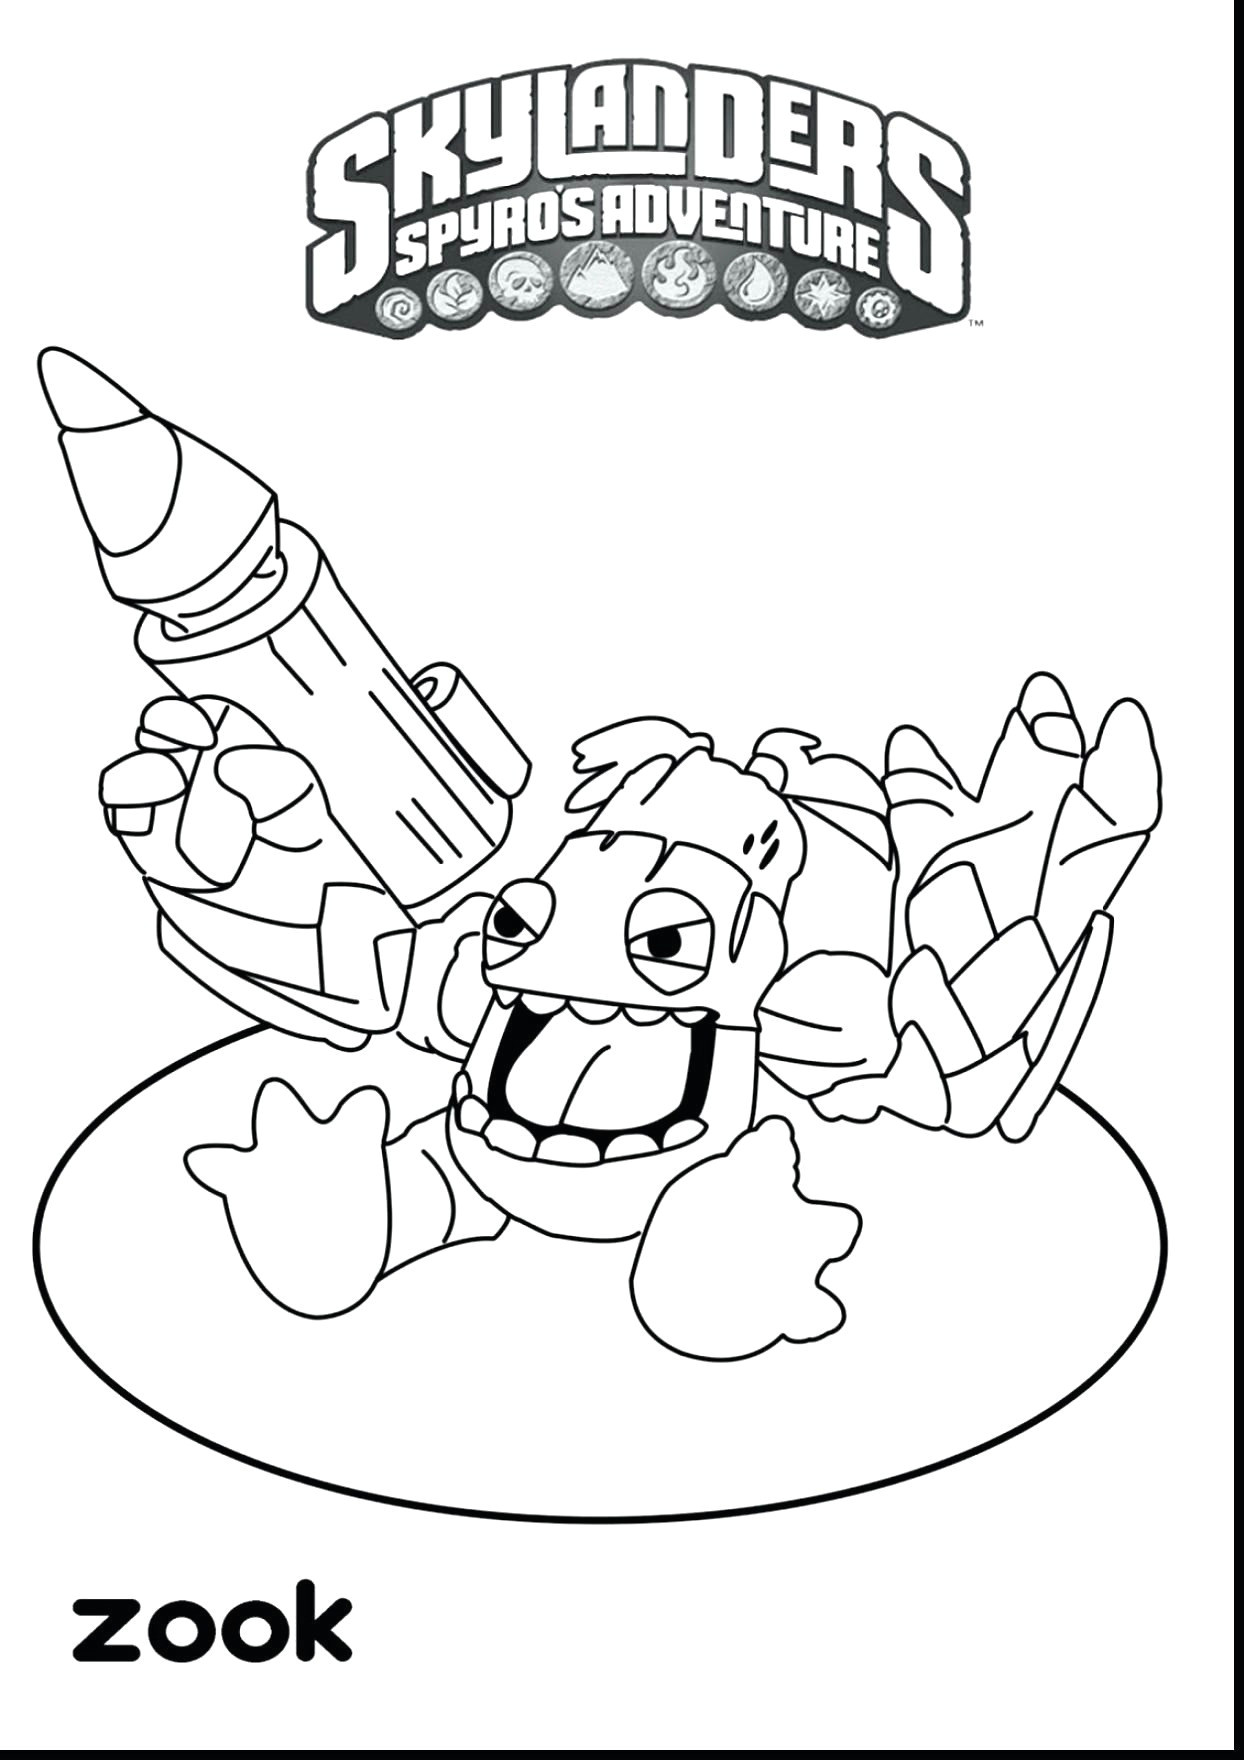 Easy Drawings O Www Colouring Pages Brilliant Easy to Draw Instruments Home Coloring